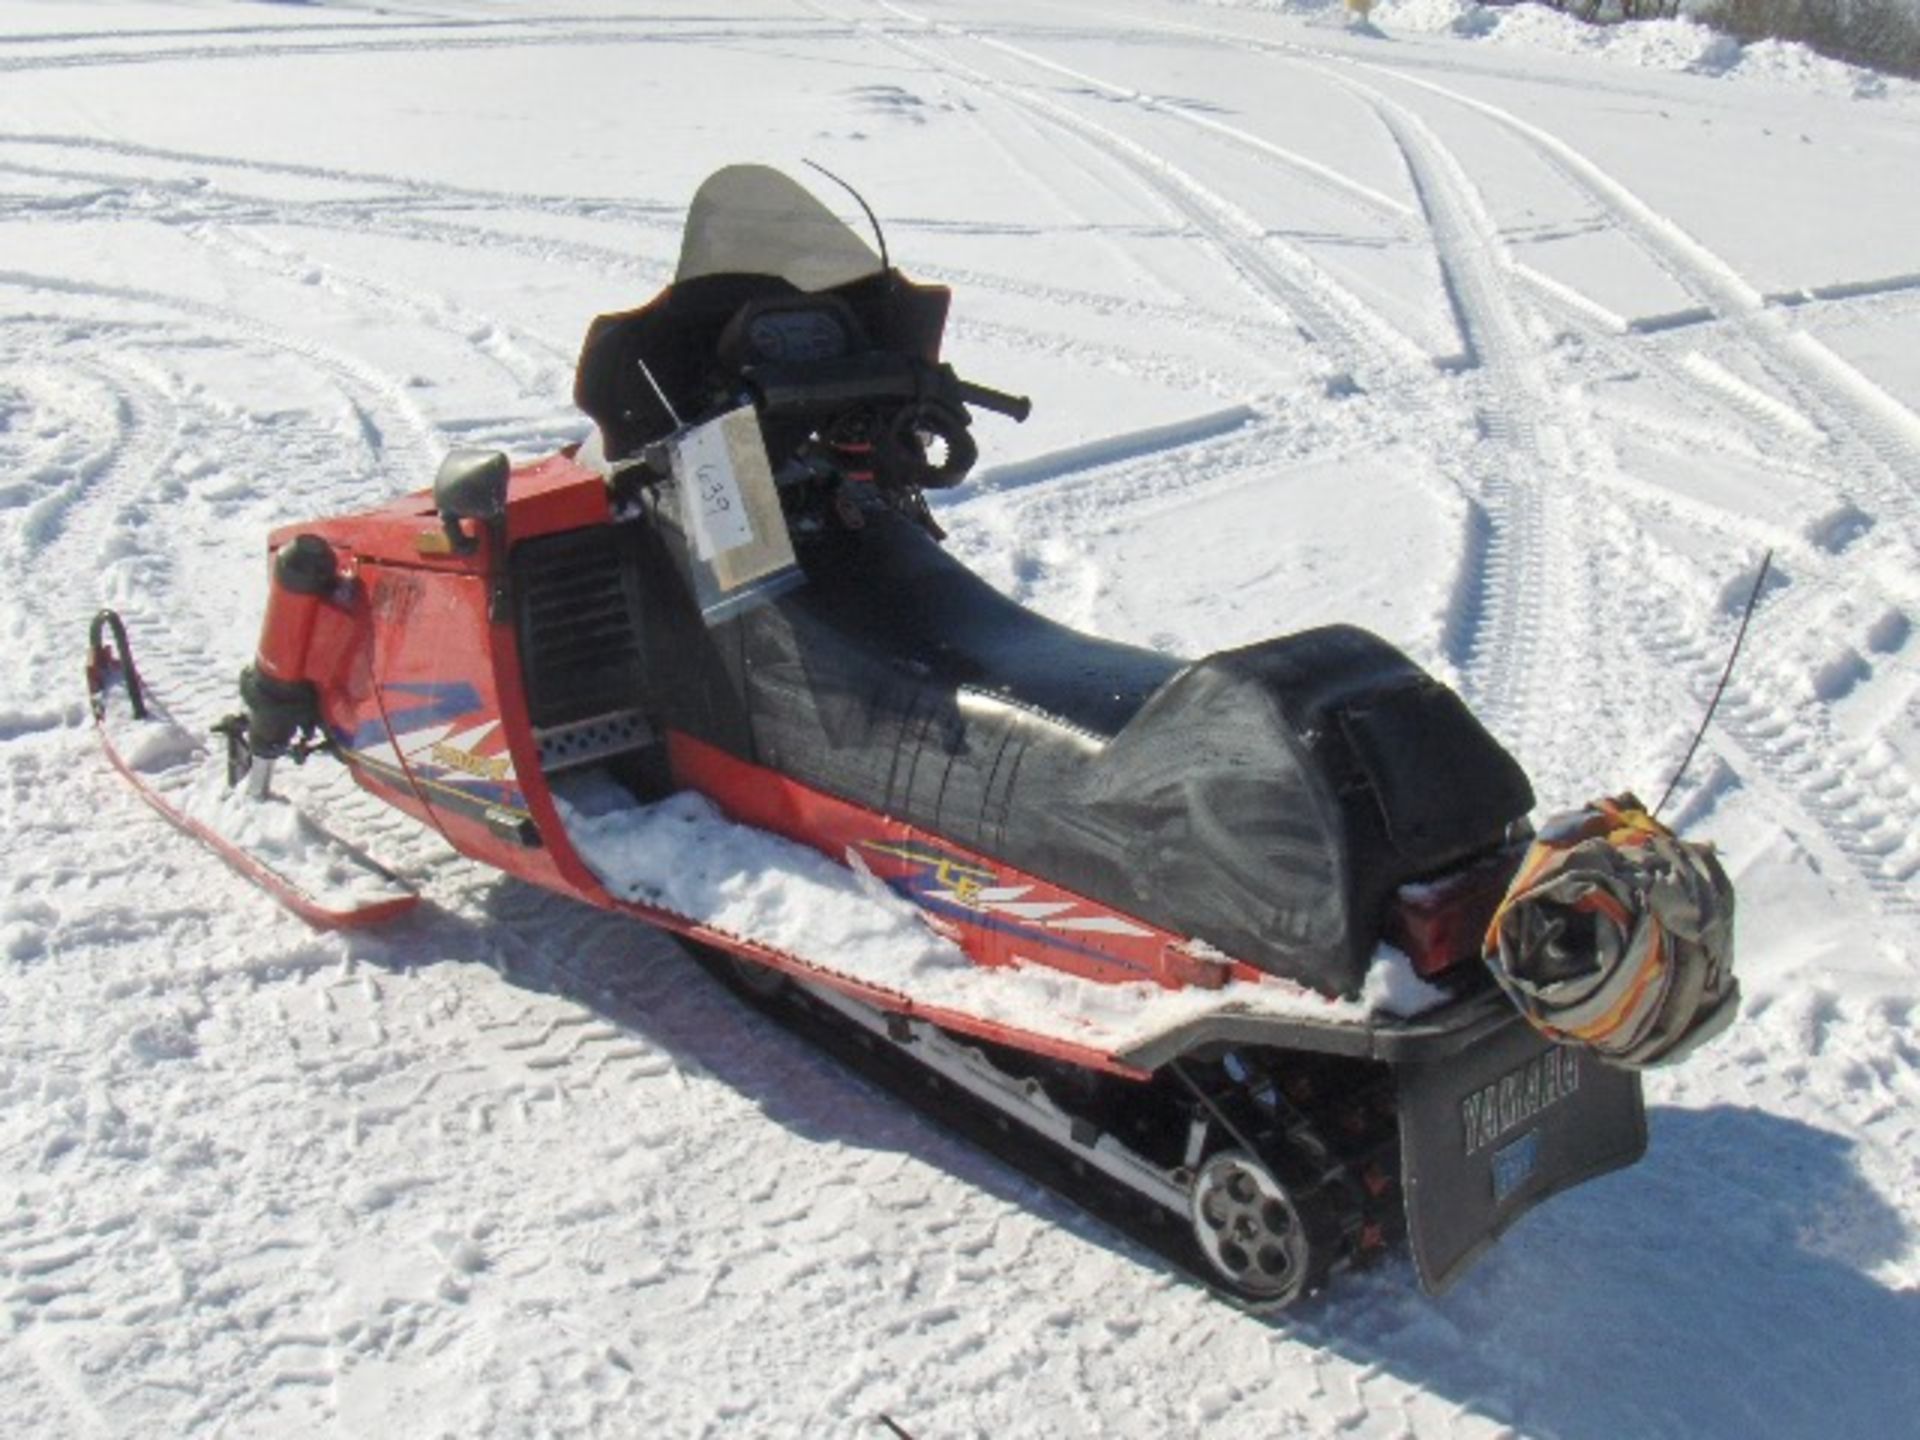 1994 YAMAHA 480 PHAZER II  8BG007205 snowmobile, owner started at time of auction check in, 2 - Image 3 of 3